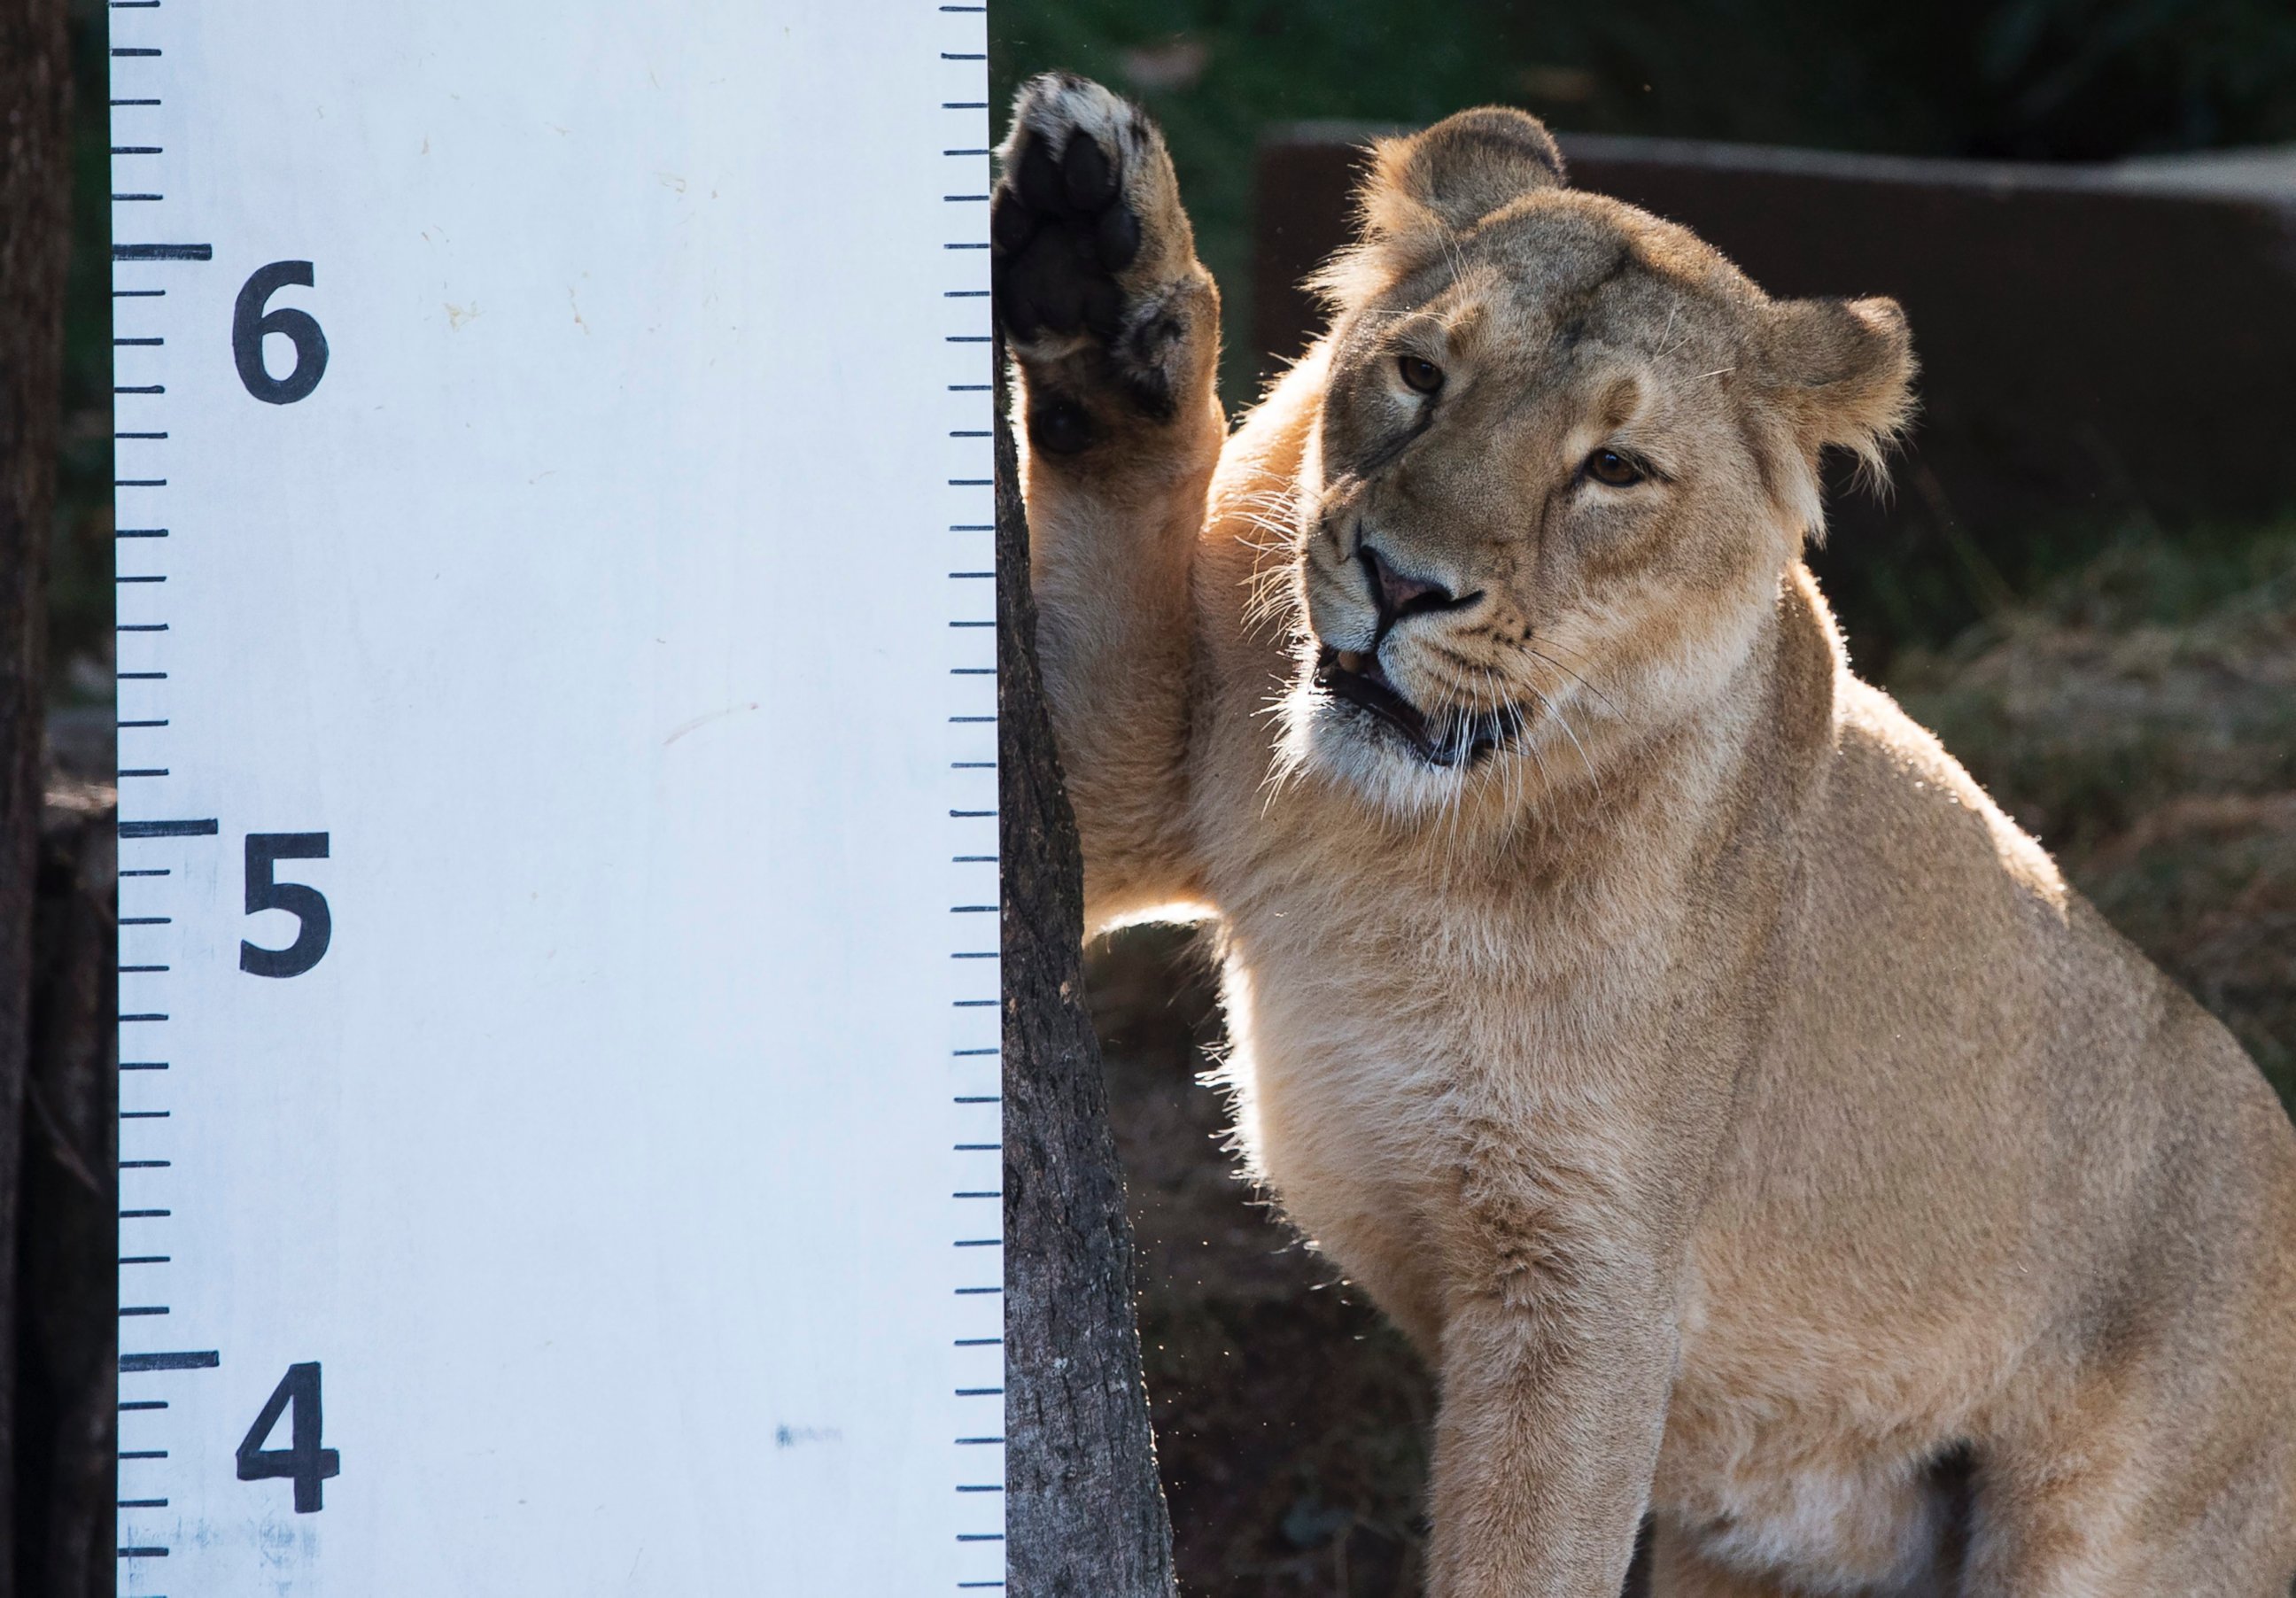 PHOTO: Heidi the Lioness stands next to a measuring scale to measure her length during the annual weigh-in at the London Zoo in London, England, August 24, 2016. 